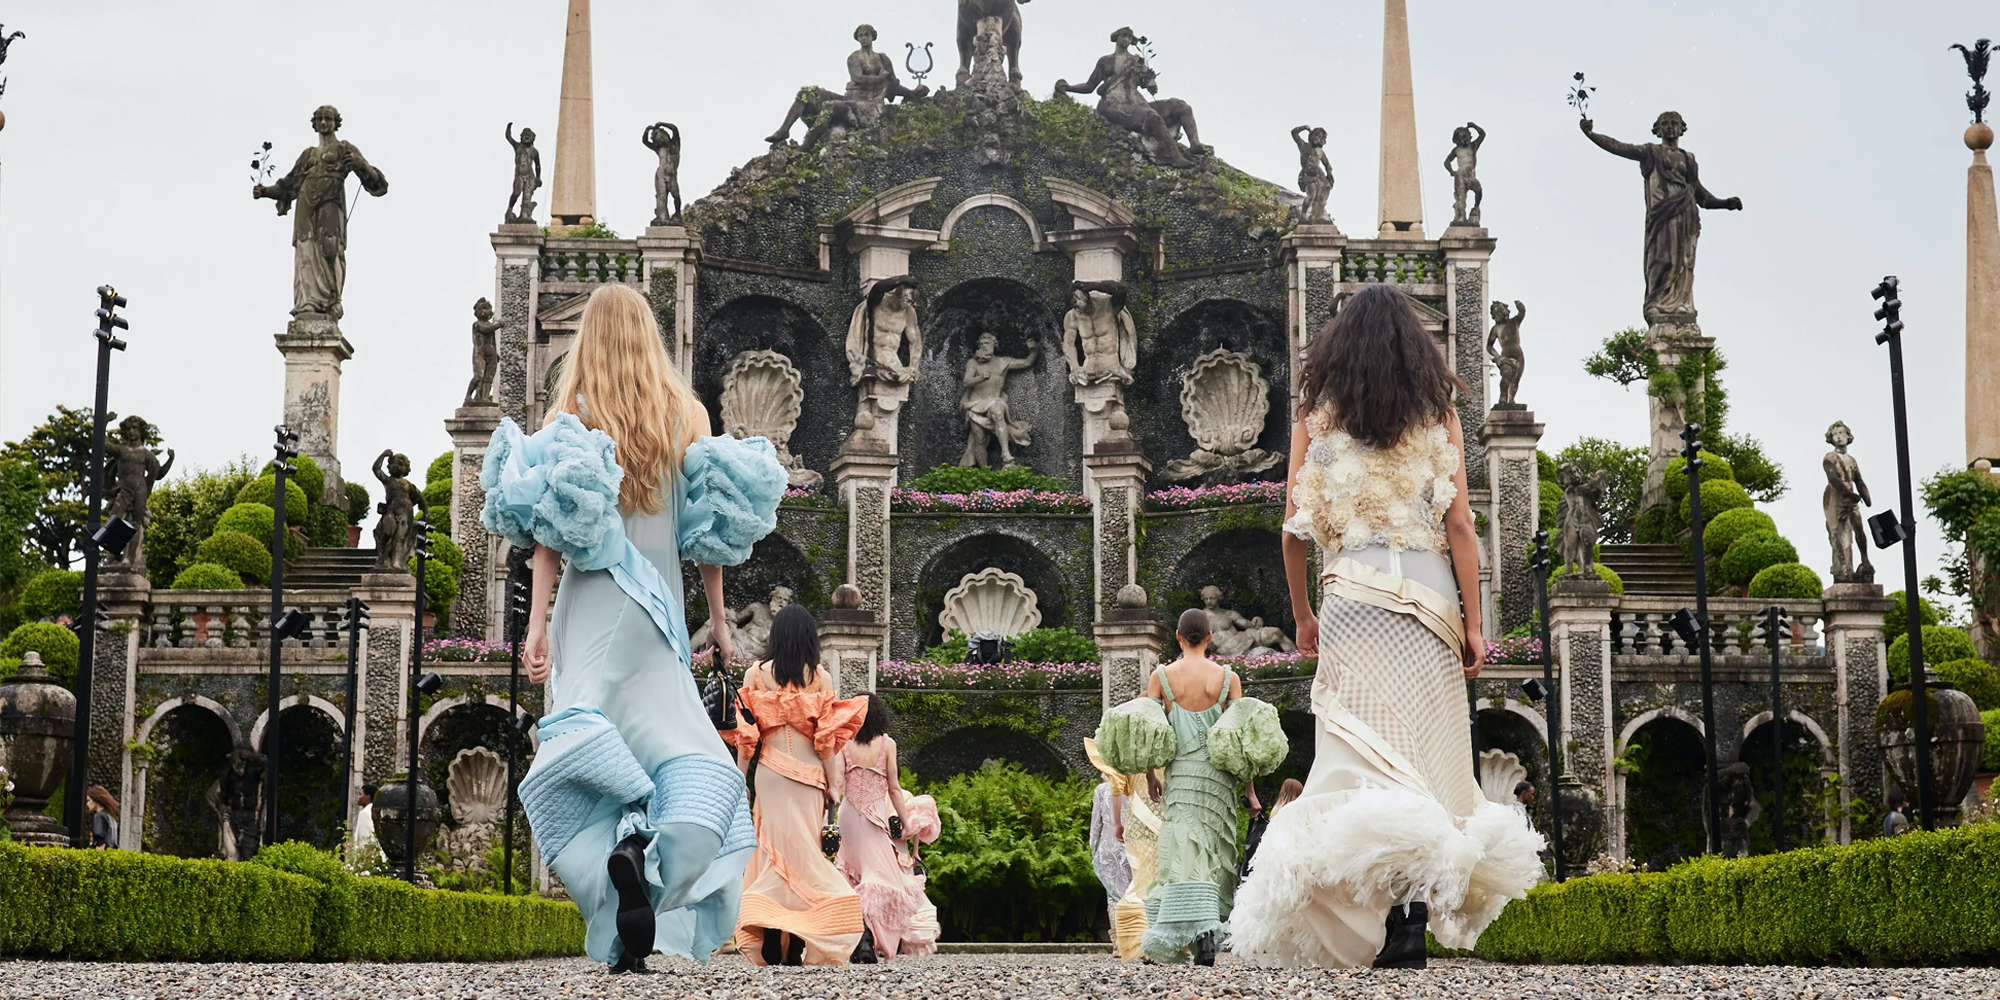 Watch The Louis Vuitton Cruise 2024 Show Live From Isola Bella